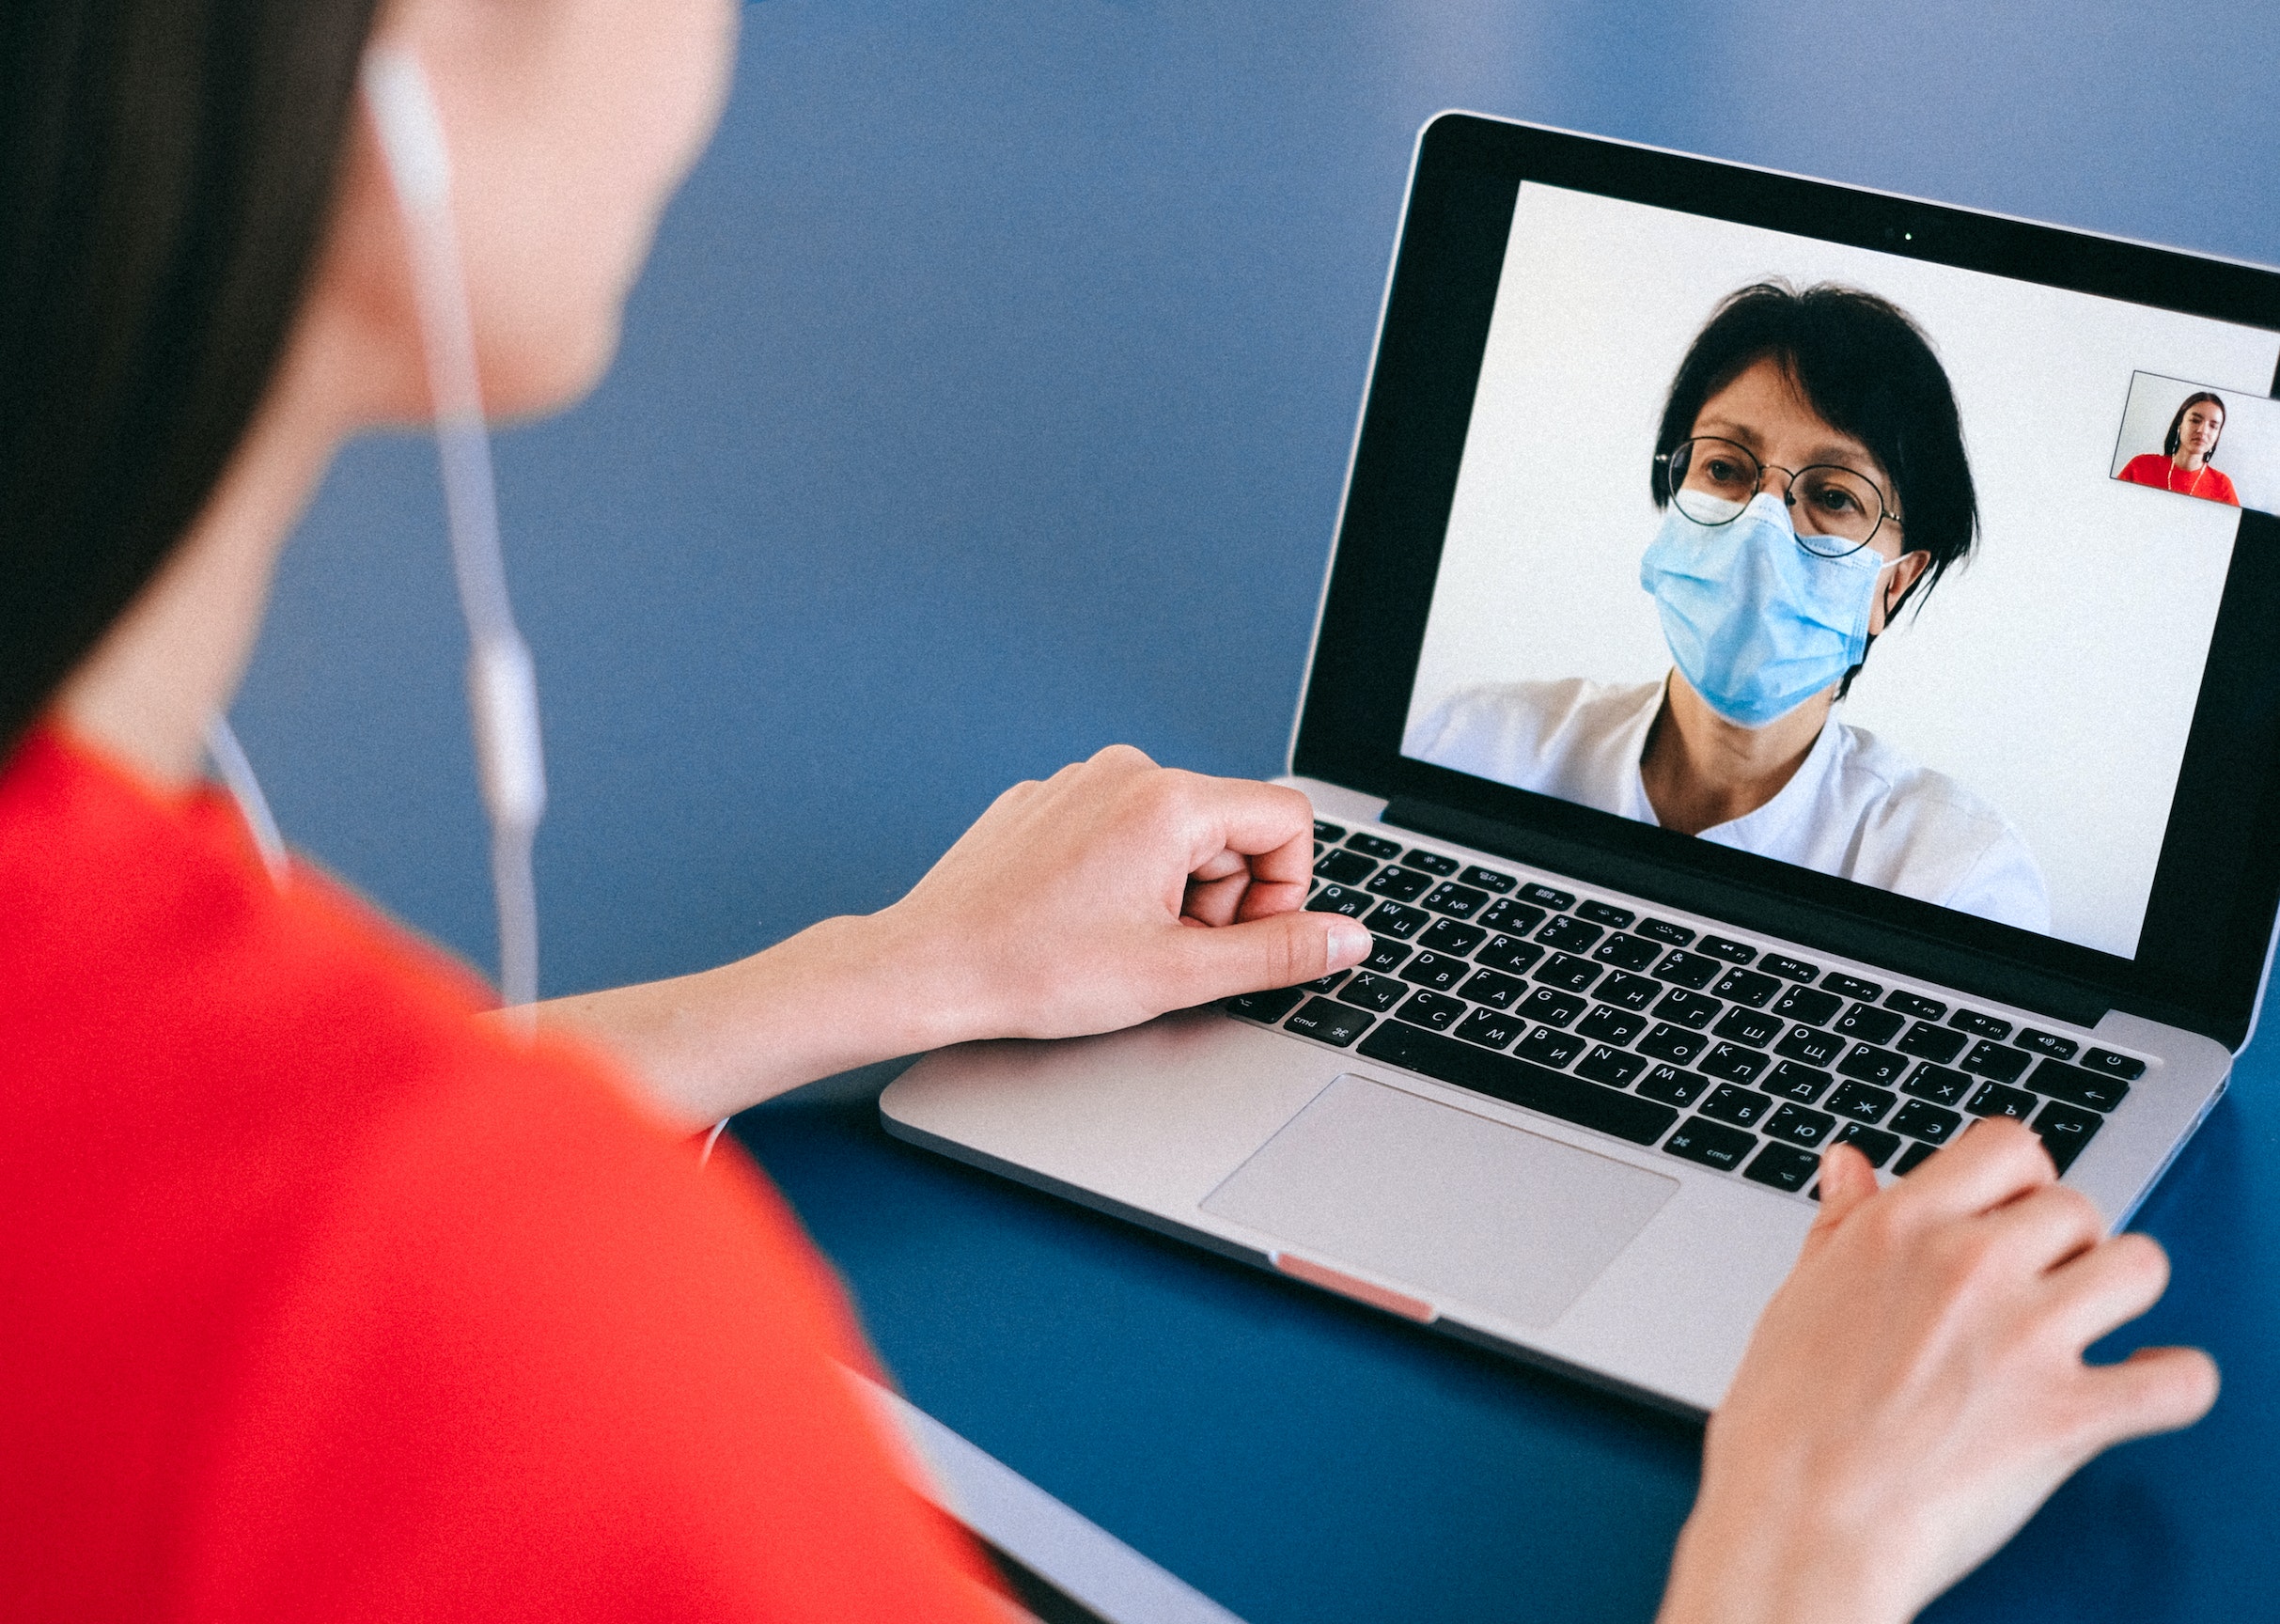 Image of a woman using a laptop to attend a telemedicine video appointment with a virtual doctor.